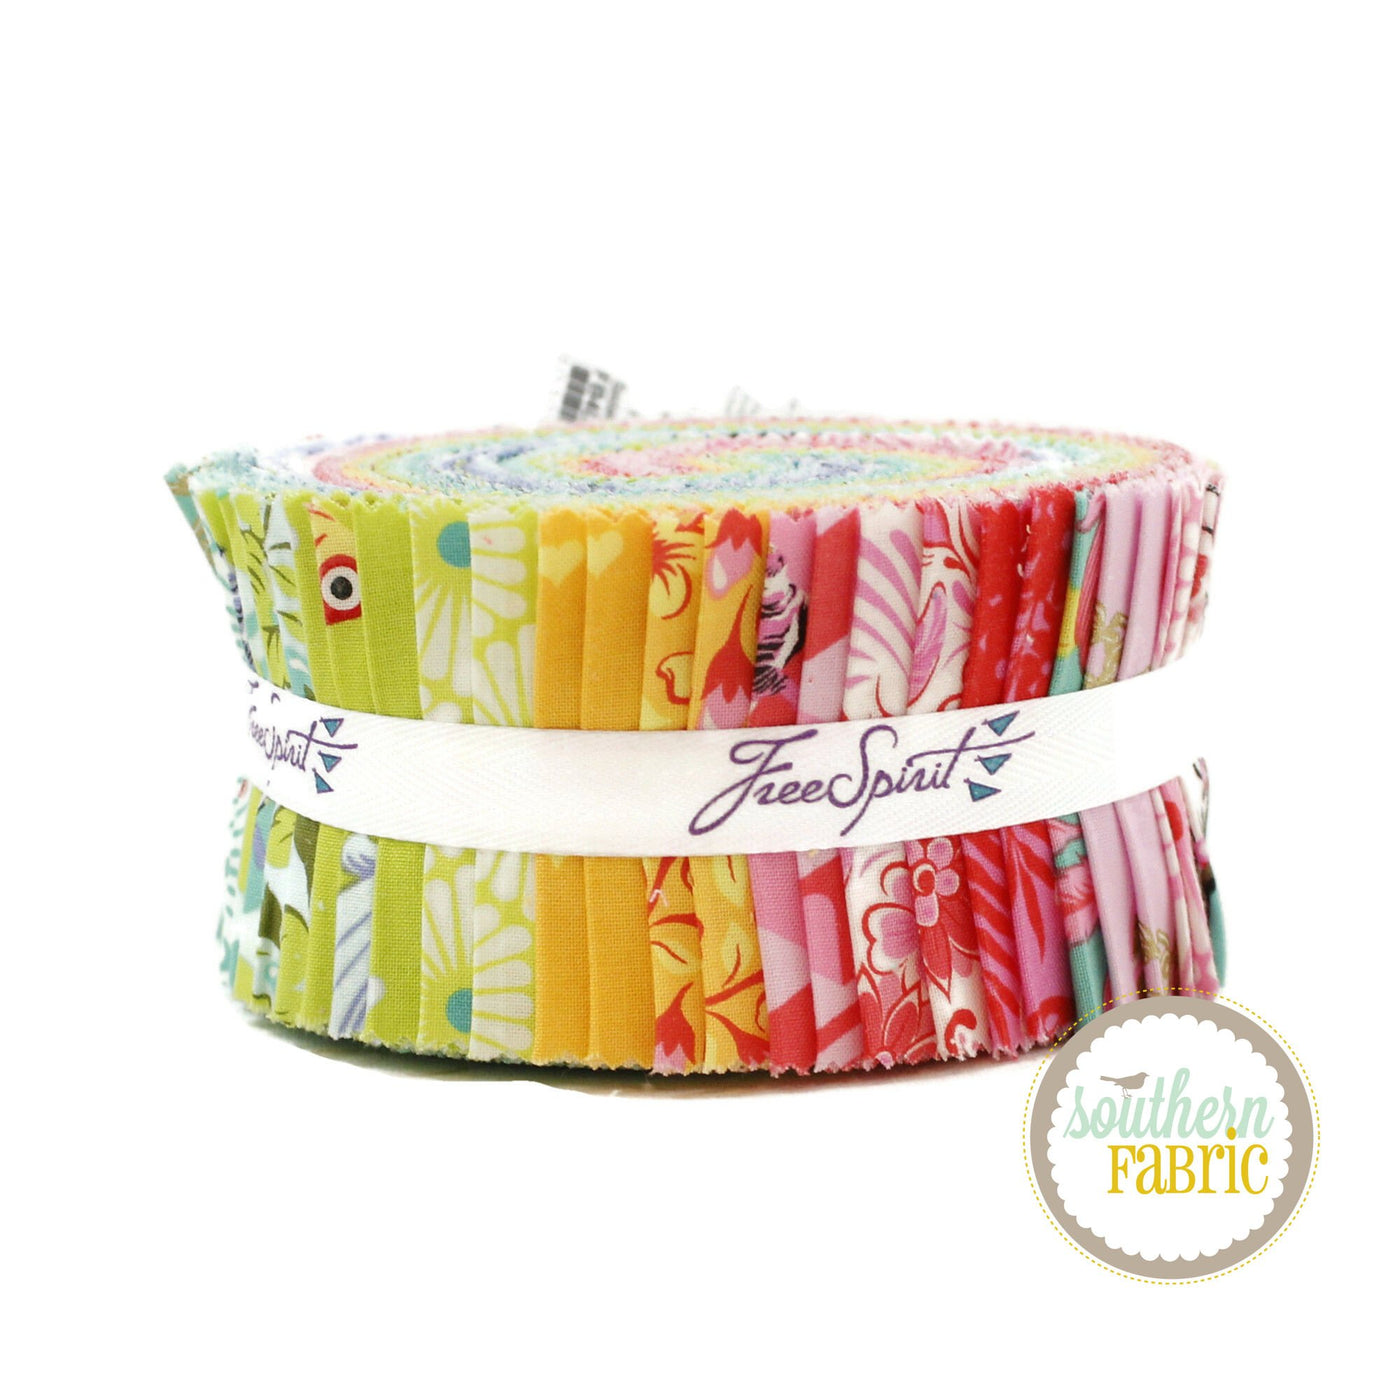 Besties Jelly Roll (40 pcs) by Tula Pink for Free Spirit (FB4DRTP.BESTIES)